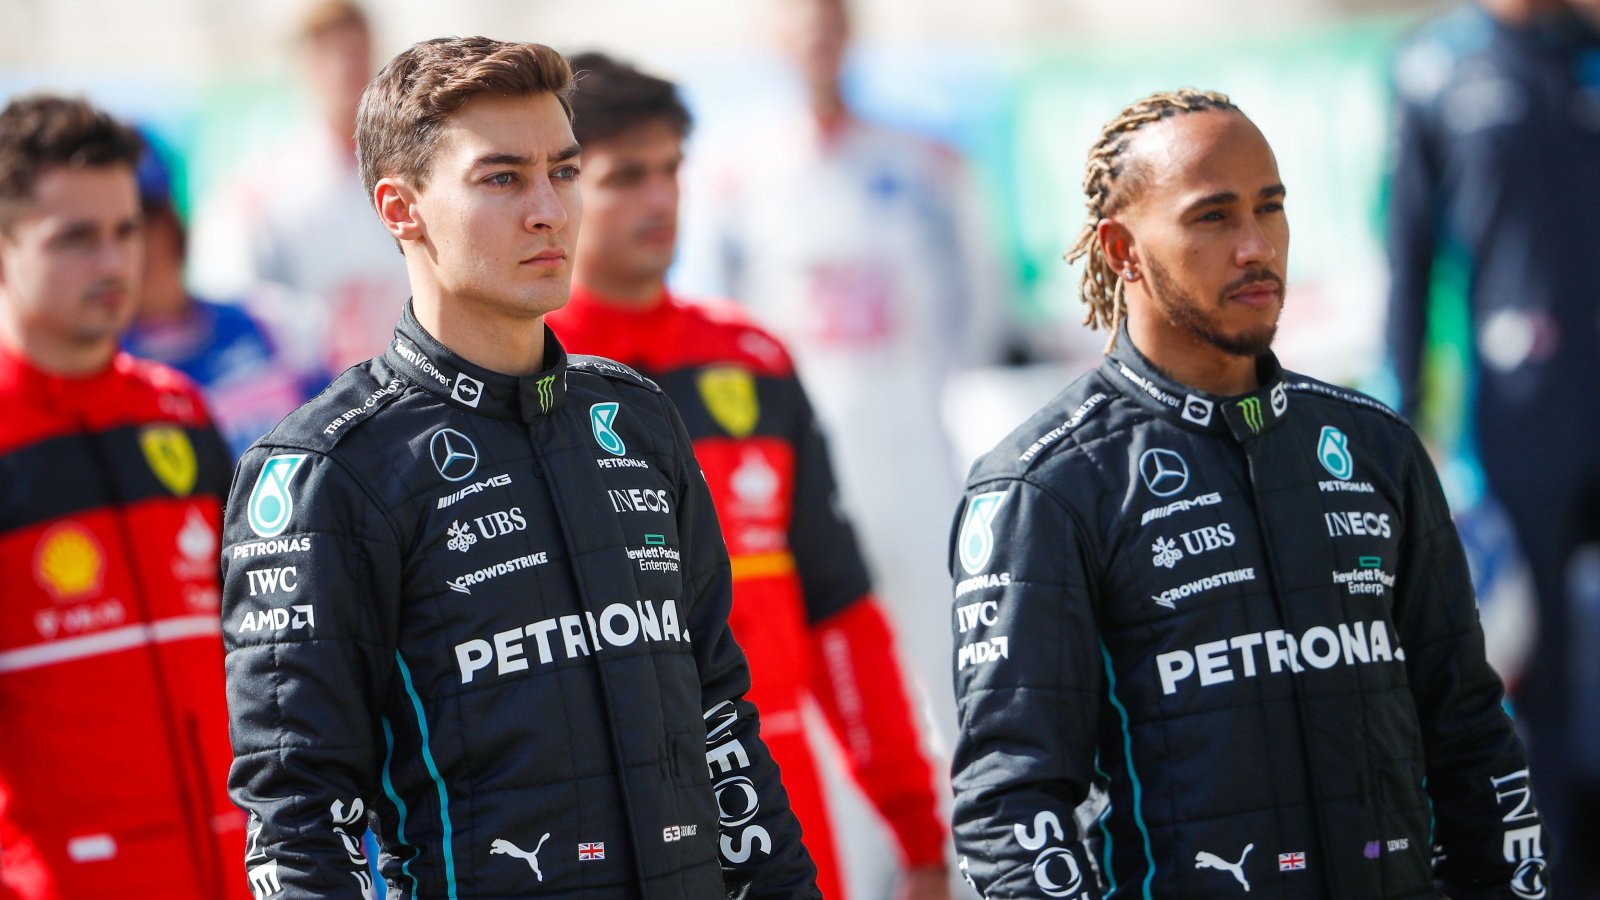 George Russell standing next to Lewis Hamilton. Sakhir, Bahrain, March 2022.